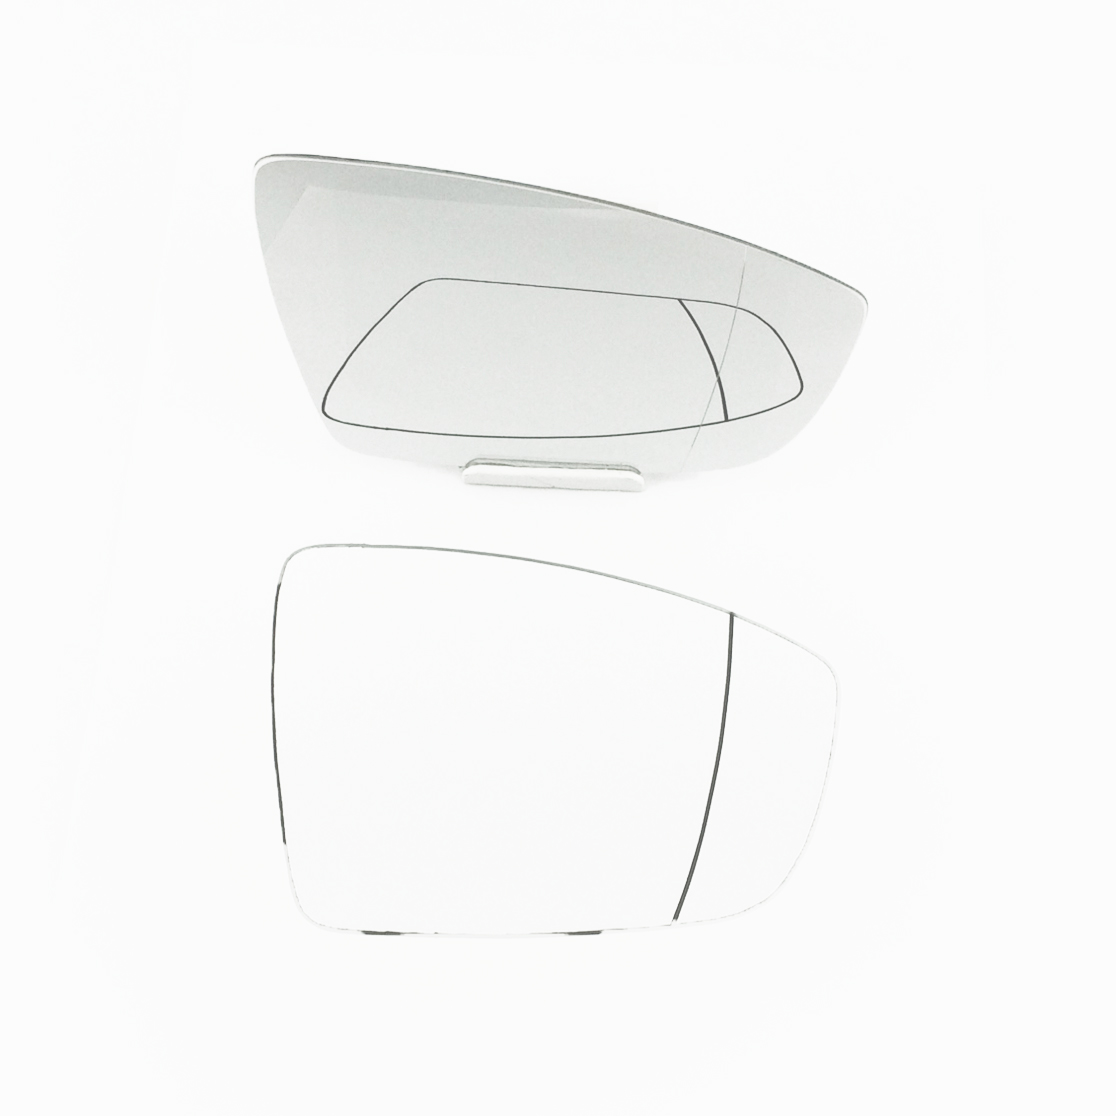 Ford Kuga Wing Mirror Glass RIGHT HAND ( UK Driver Side ) 2012 to 2019 – Wide Angle Wing Mirror